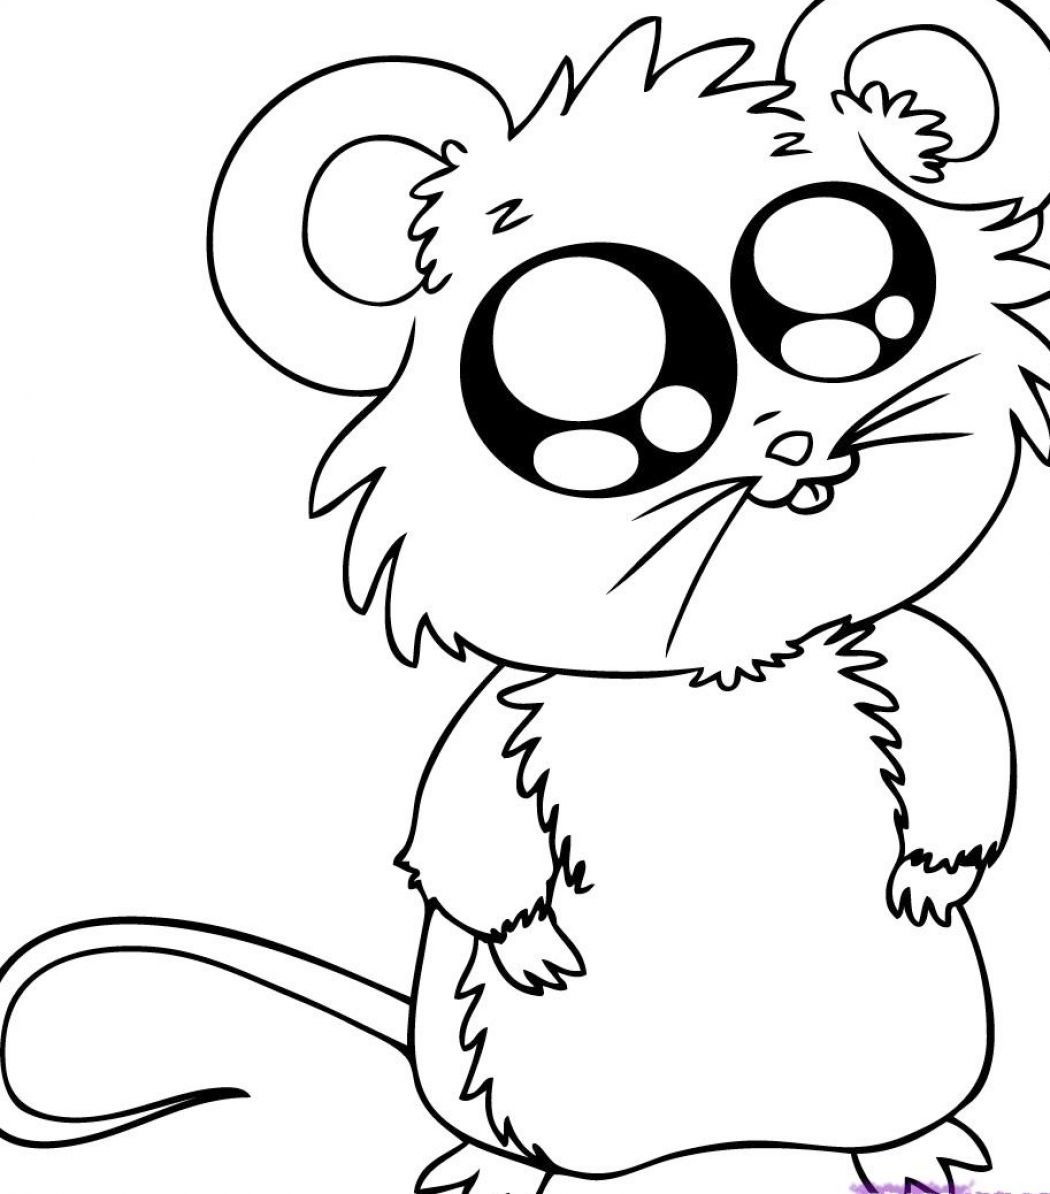 Cartoon animal coloring pages to download and print for free